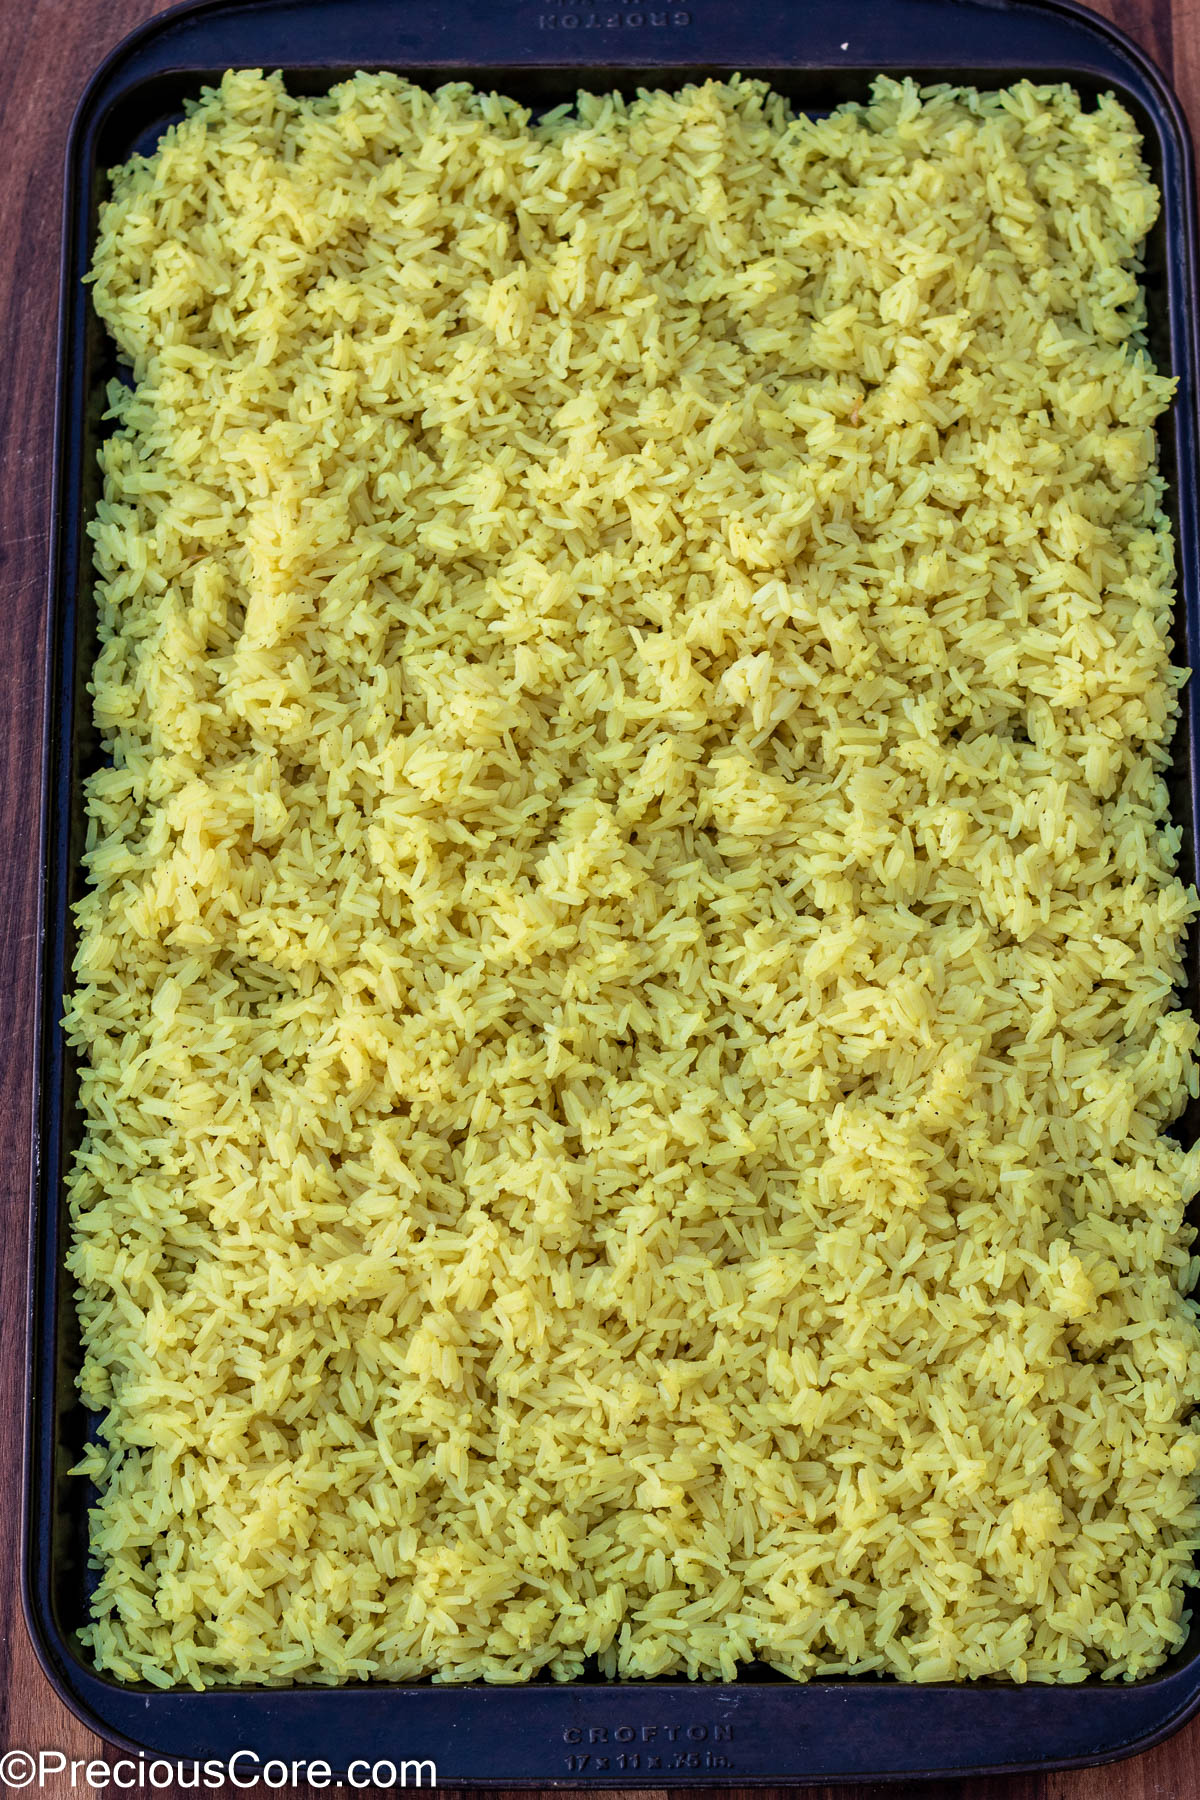 Cooked rice spread on a tray.